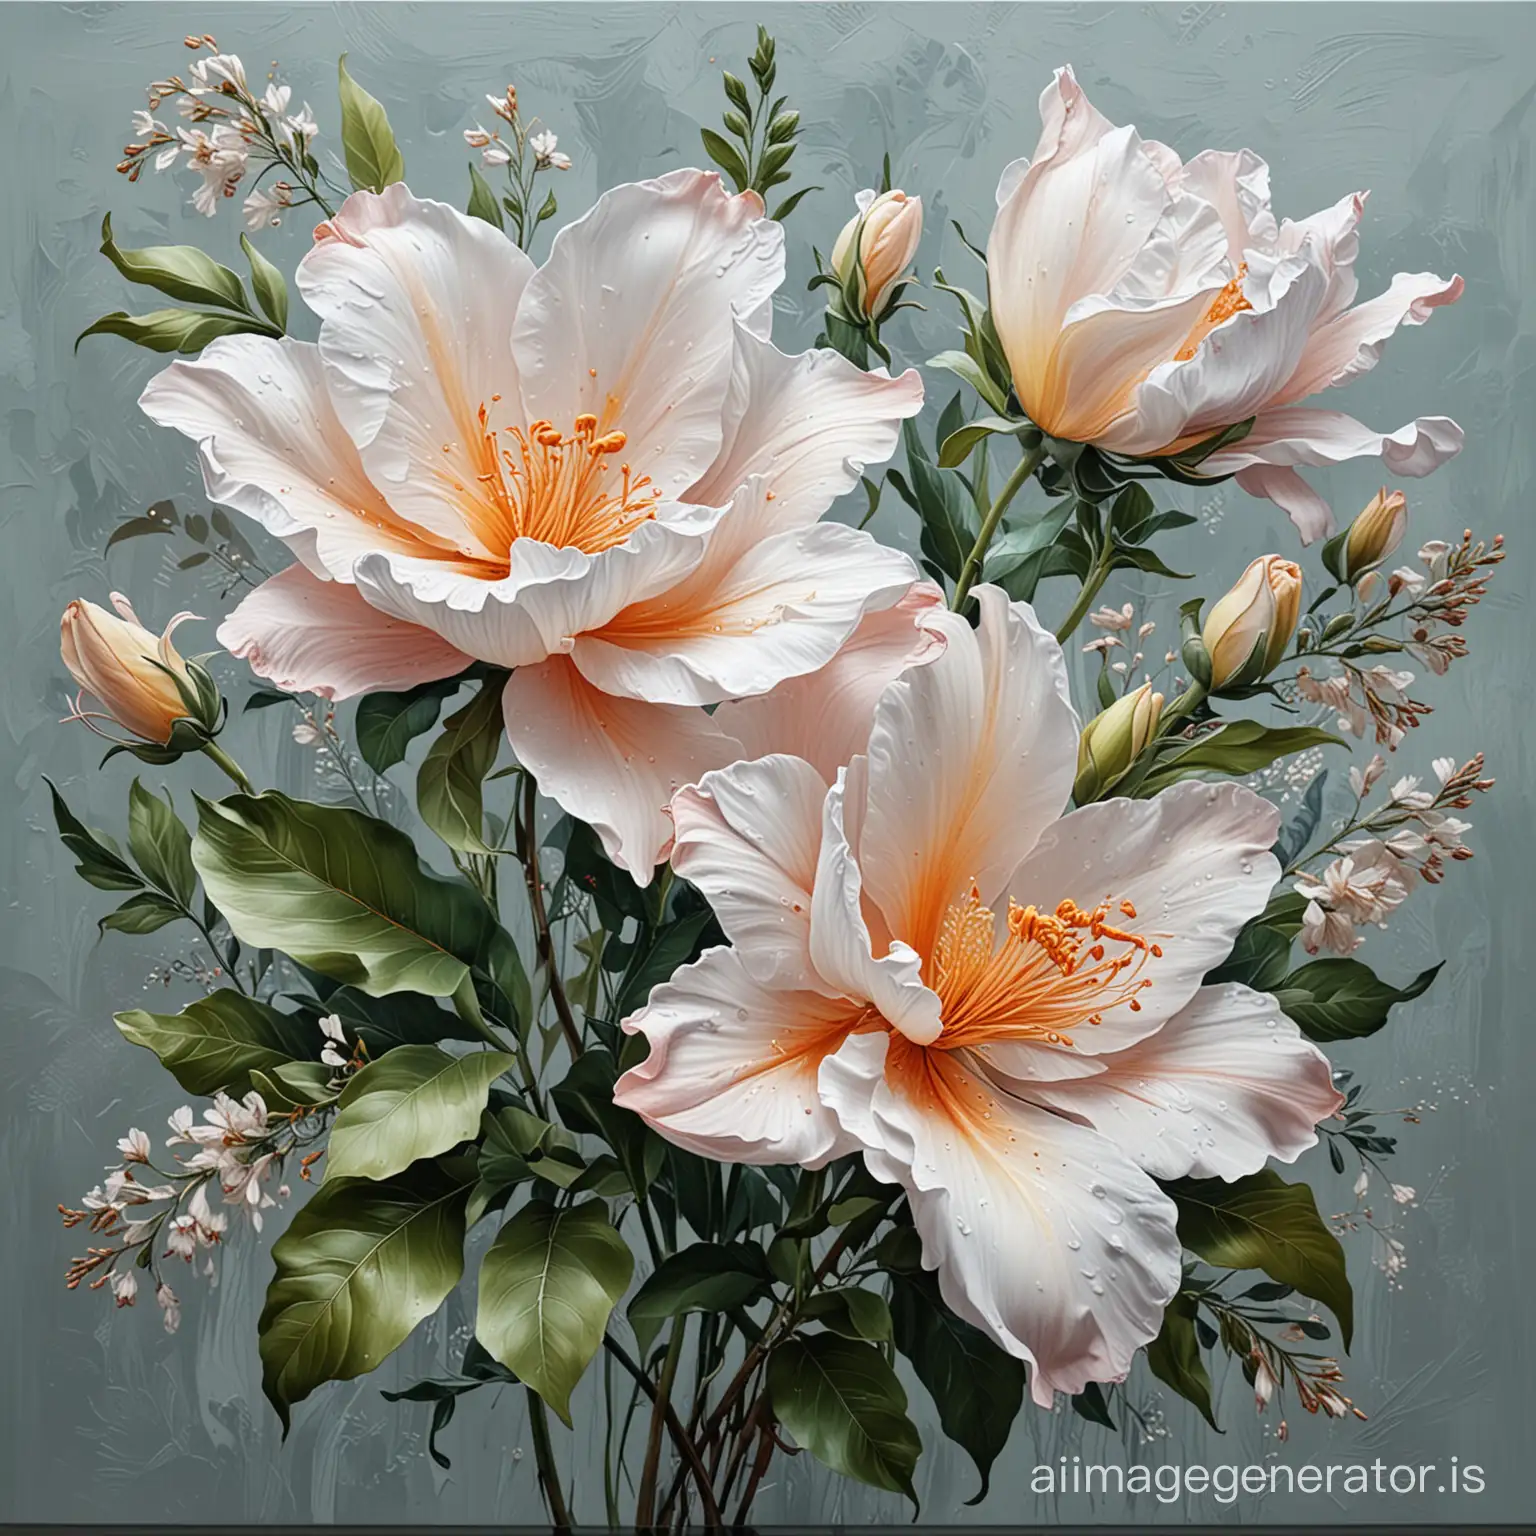 Hyperrealistic-Graceful-Floral-Painting-with-Thick-Impasto-Strokes